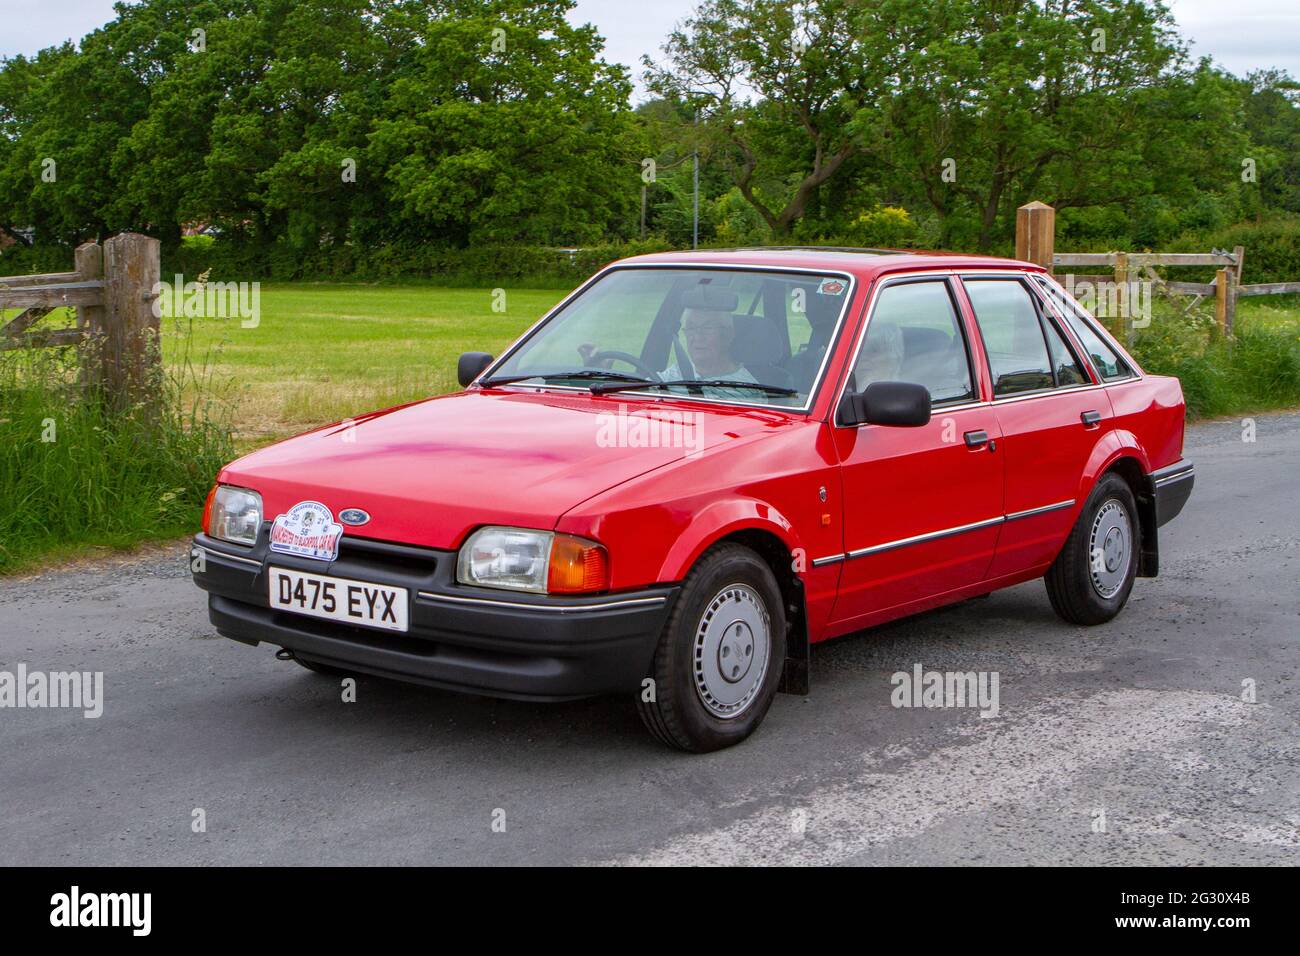 1986 1980s 80s Red Petrol FORD ESCORT  Annual Manchester to Blackpool Vintage & Classic Car Run The event is a Touring Assembly Stock Photo